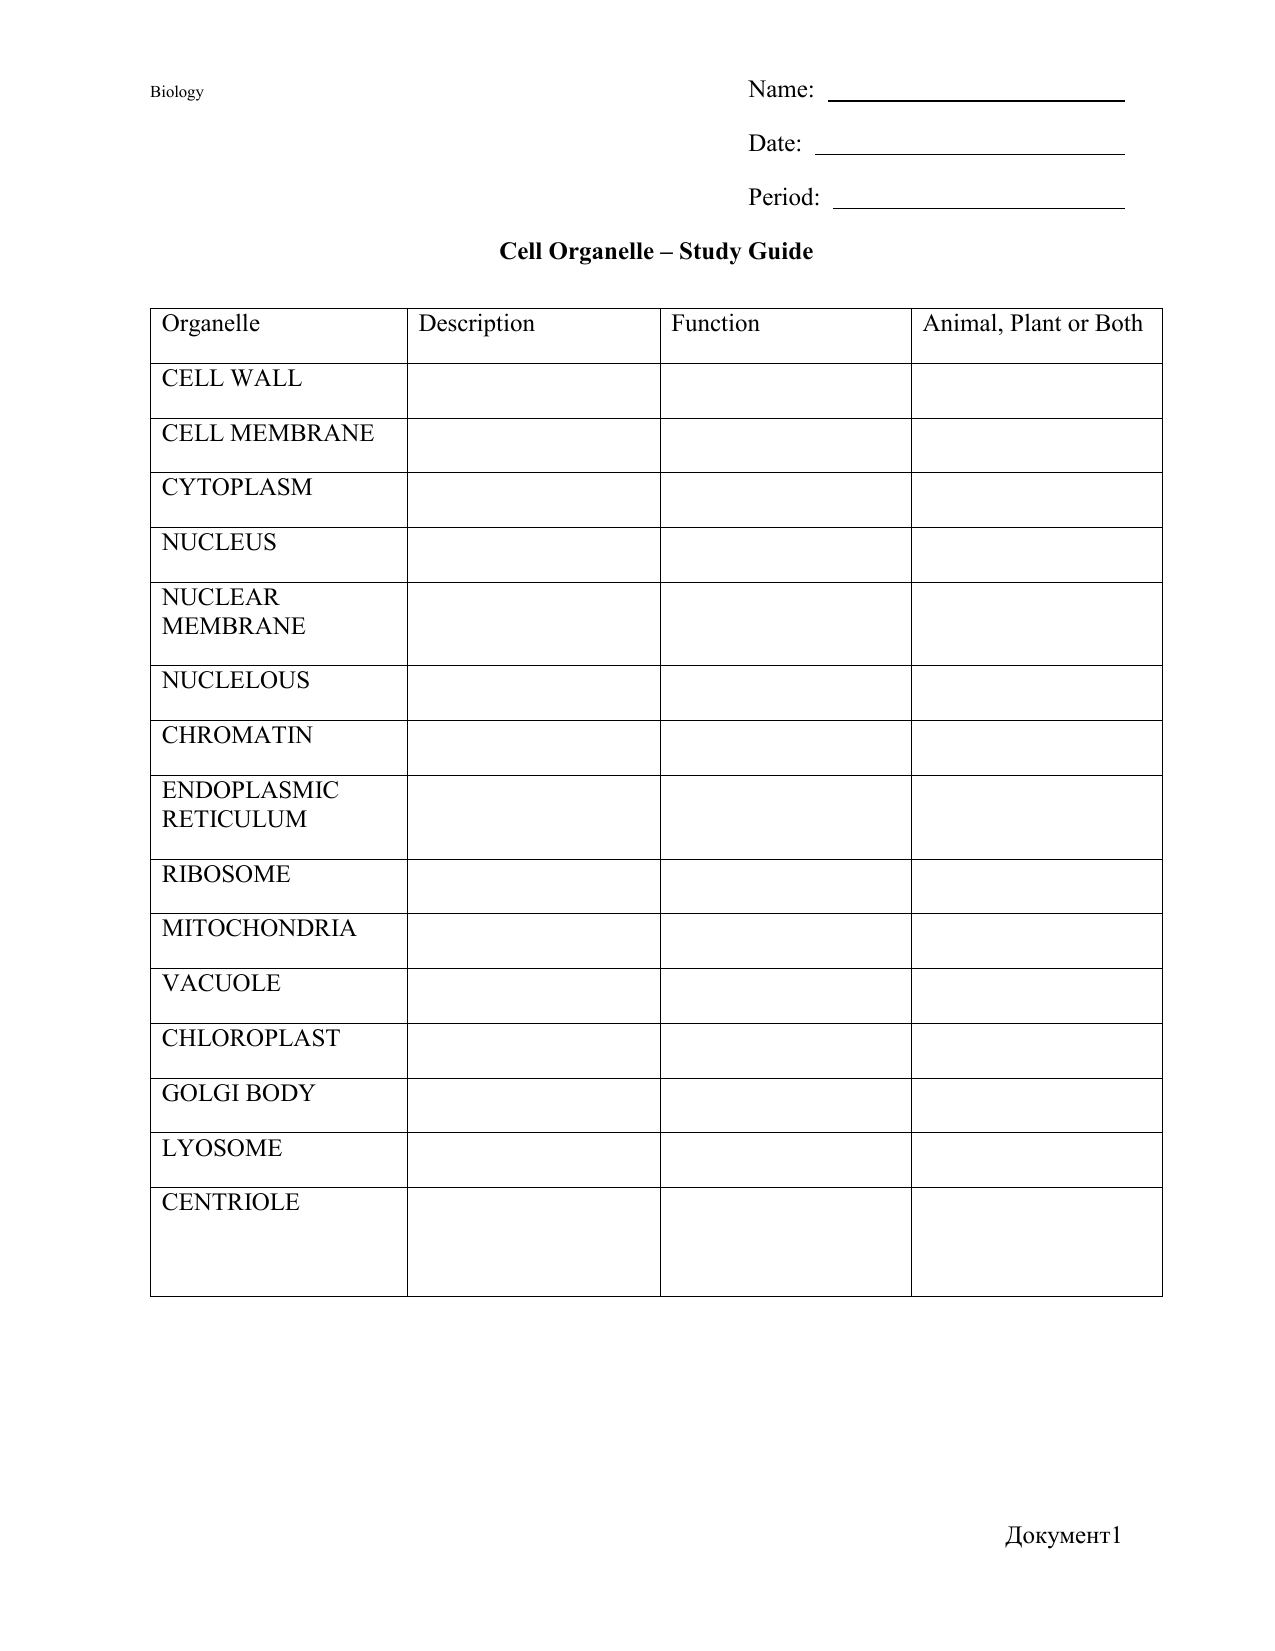 Cell Organelle - Study Guide